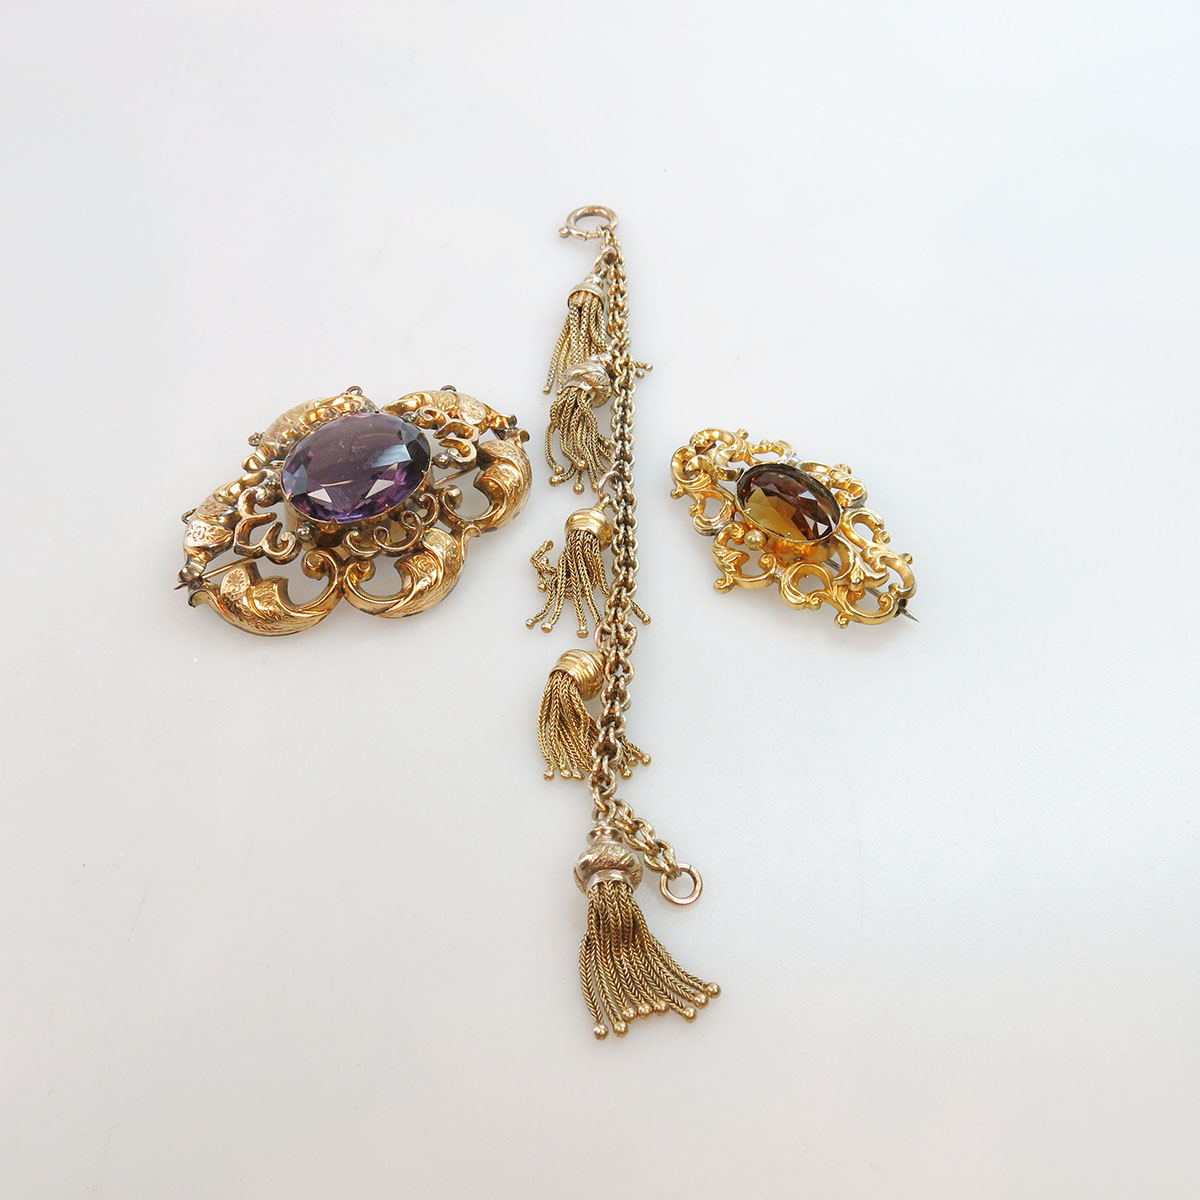 2 Victorian Gold And Gold-Filled Brooches